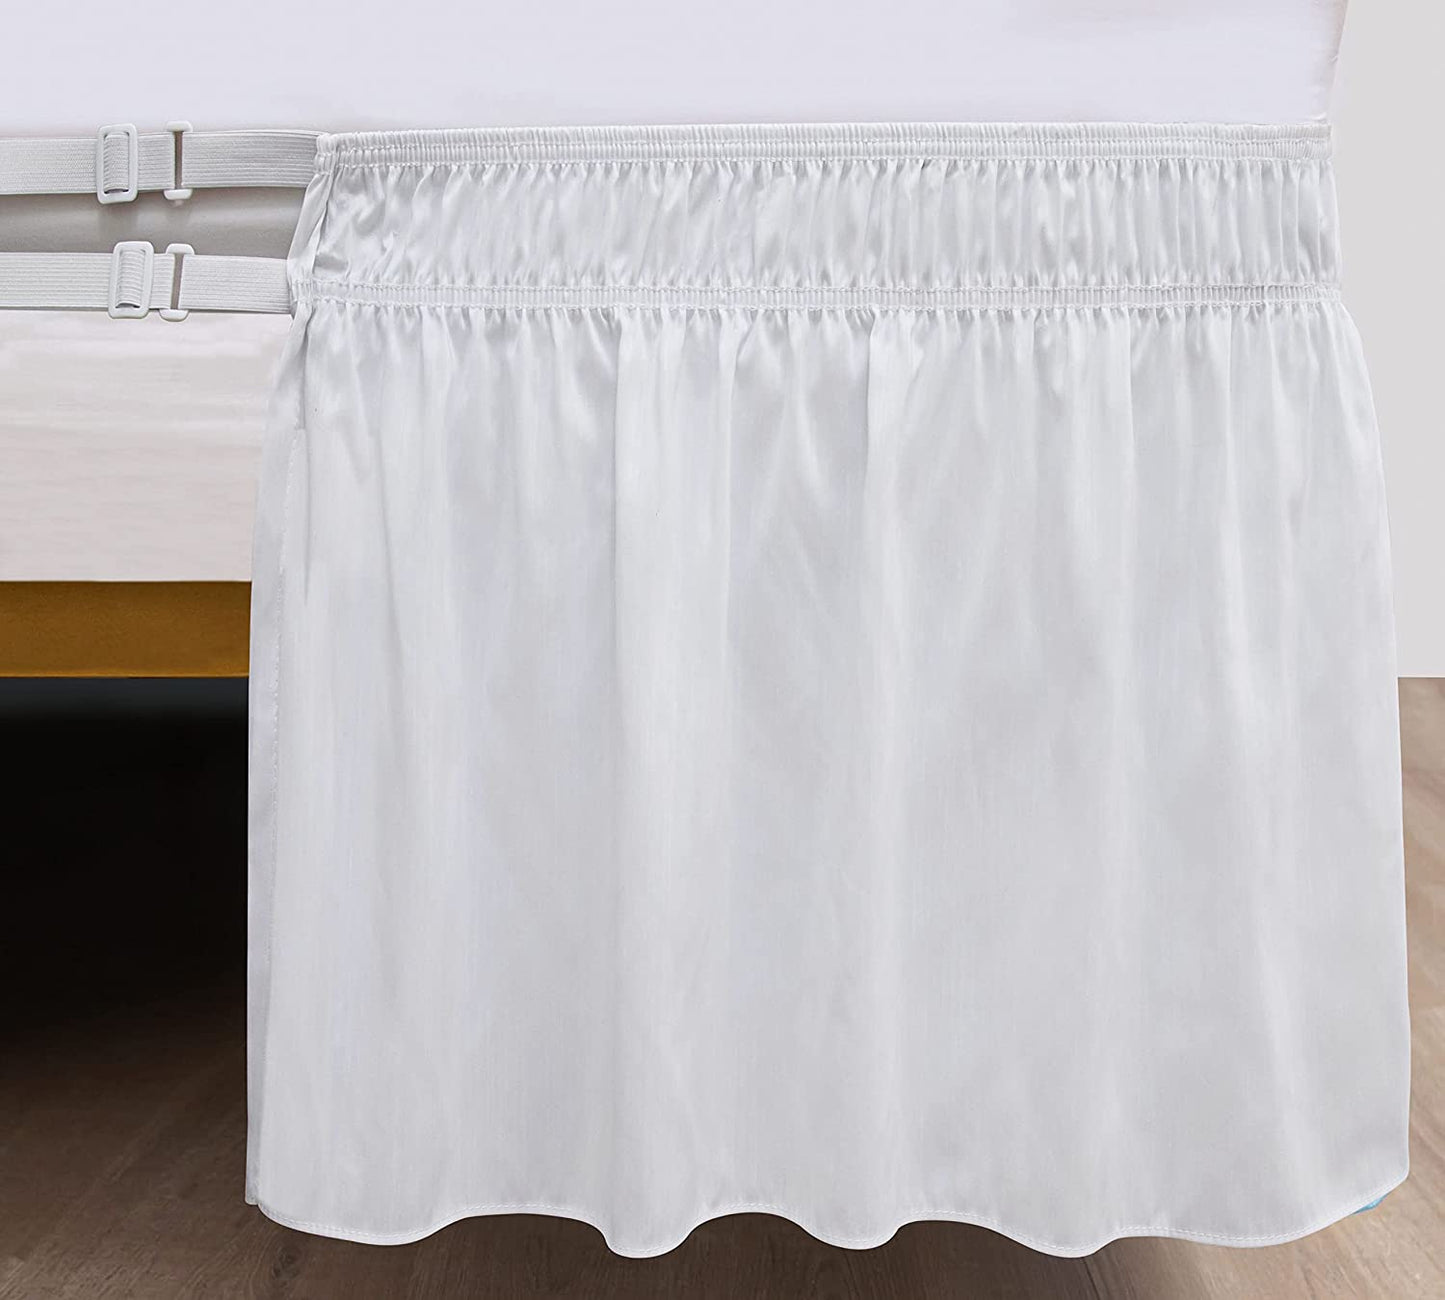 Biscaynebay Wrap Around Bed Skirts for Queen Beds 15 Inches Drop, White Elastic Dust Ruffles Easy Fit Wrinkle & Fade Resistant Silky Luxurious Fabric Solid Machine Washable